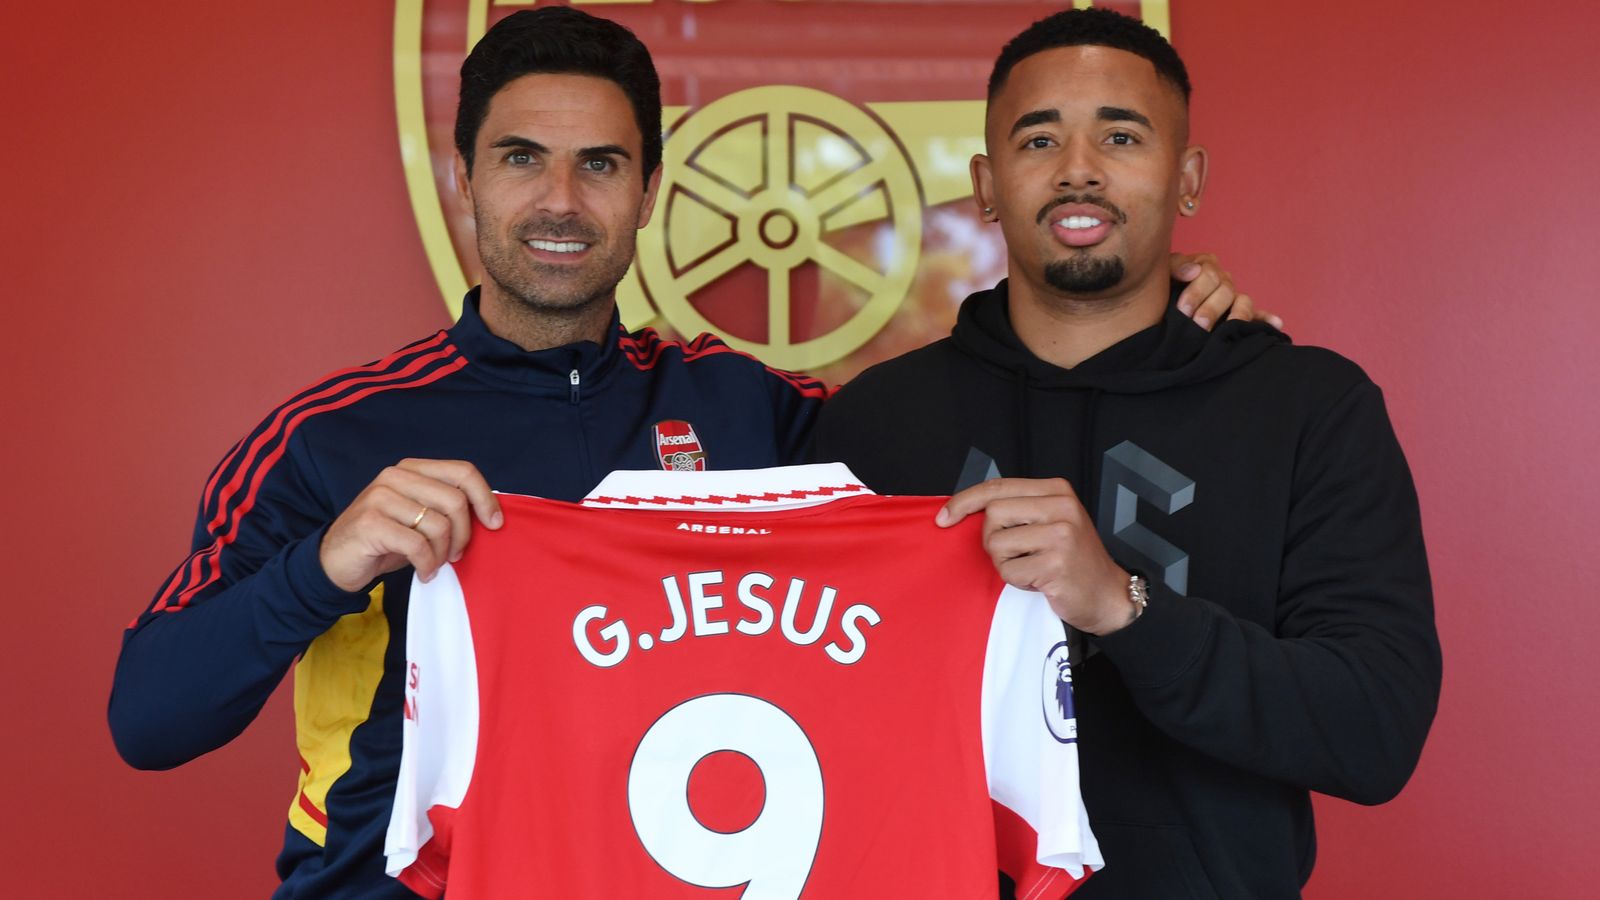 Gabriel Jesus joins Arsenal: Alan Smith says Brazilian forward’s signing from Man City fits Mikel Arteta’s project